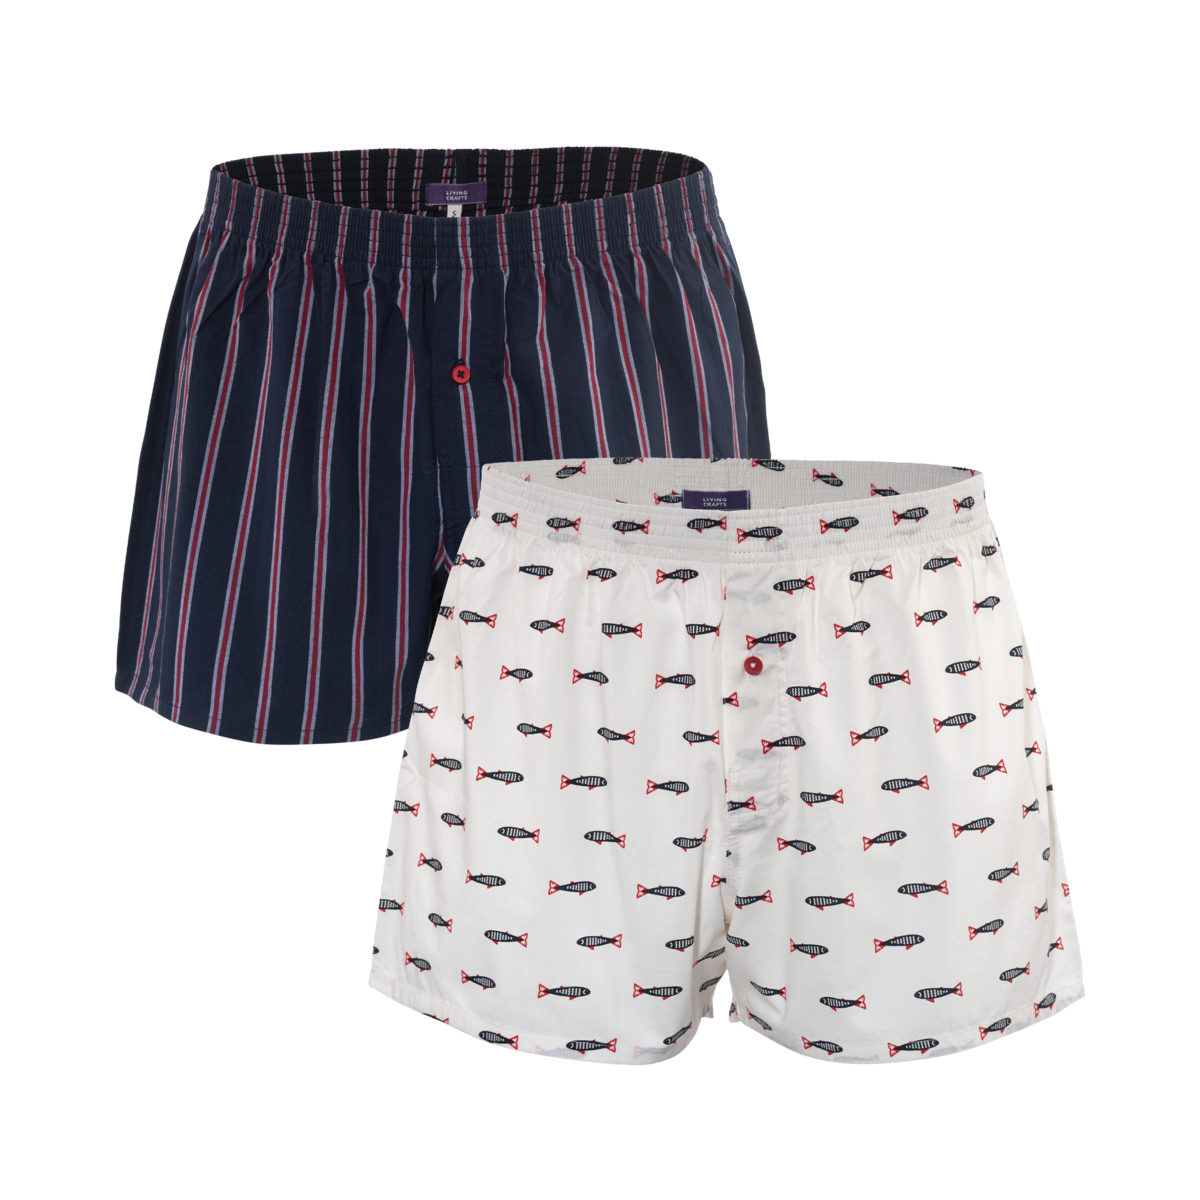 Striped Boxer shorts, pack of 2, KEITH